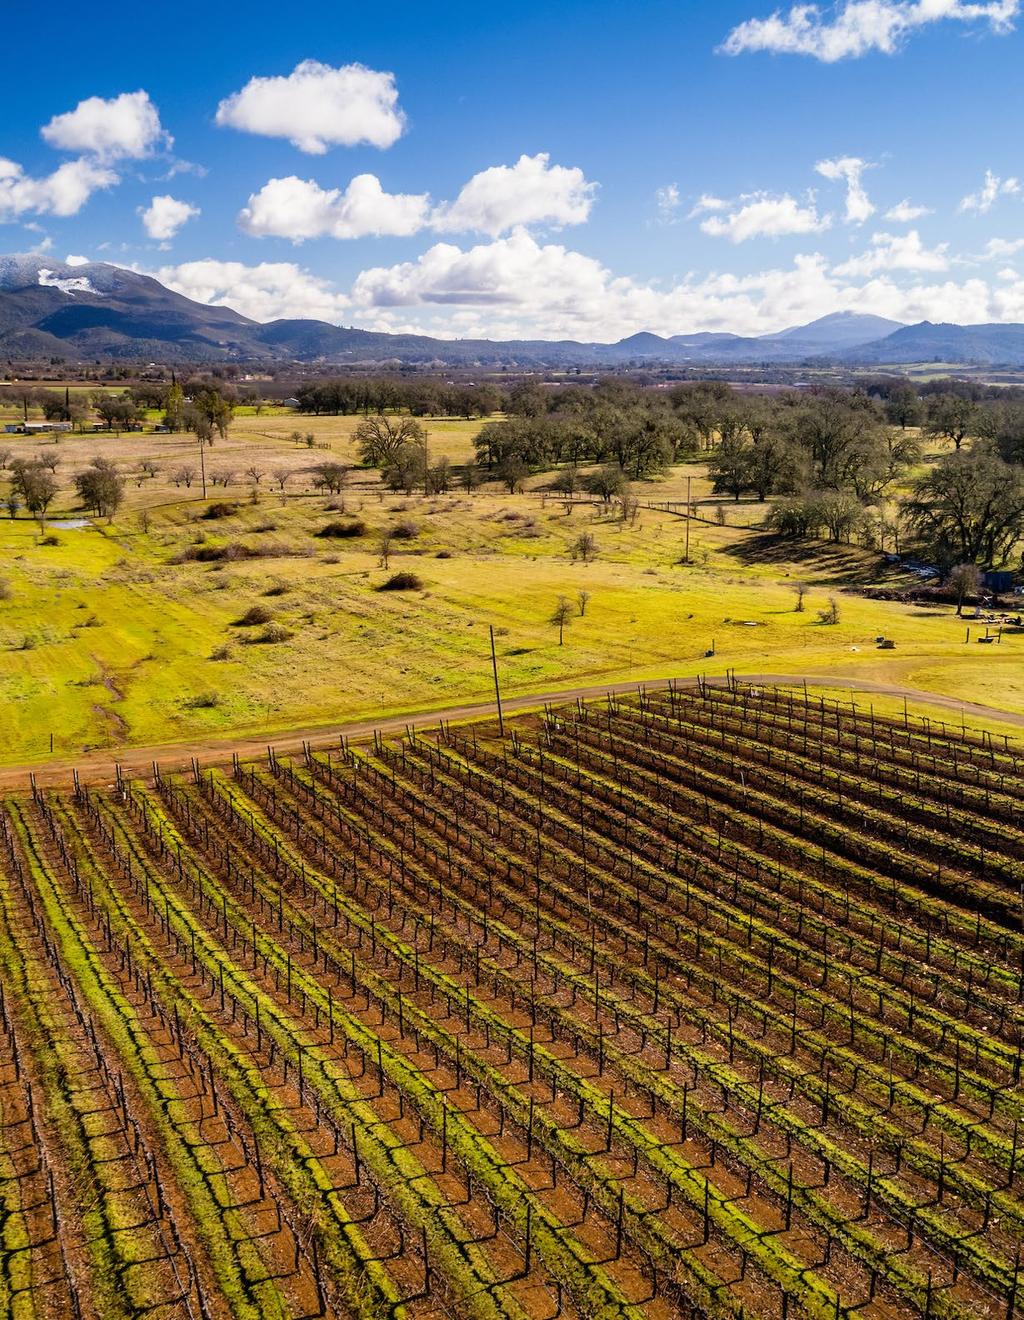 Located four and one-half miles south of Lakeport and set in the evening shadows of the Mayacamas Mountains, this Ag zoned 86-acre ranch is home to 42+/- acres of vineyard and an additional 24+/-